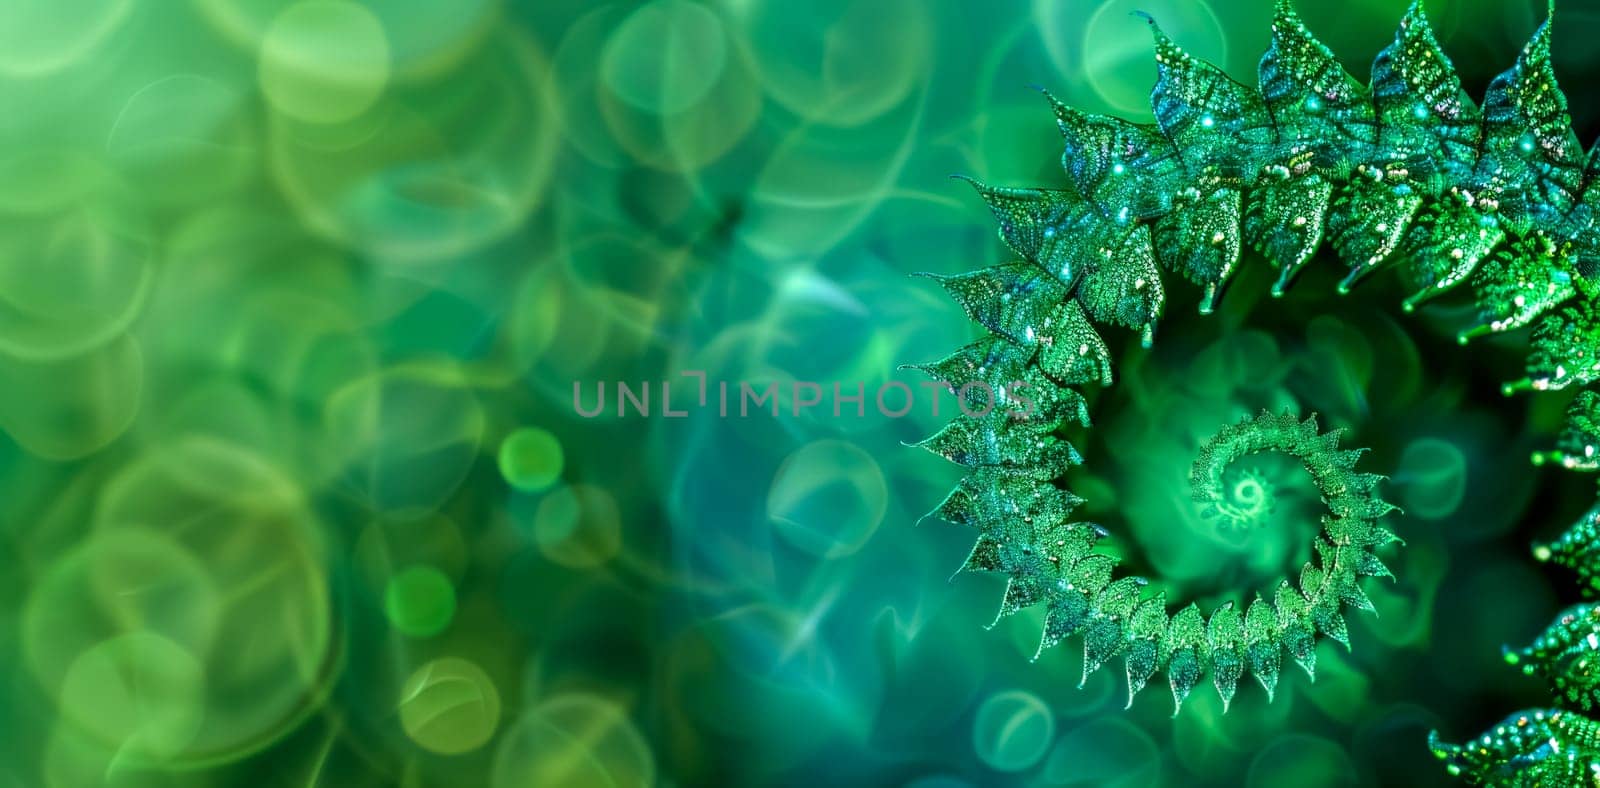 Emerald fractal infinity: abstract green digital art background with mathematical geometry. Infinite spiral pattern. Computer generated bokeh. Vibrant color wallpaper. Modern science artistic backdrop